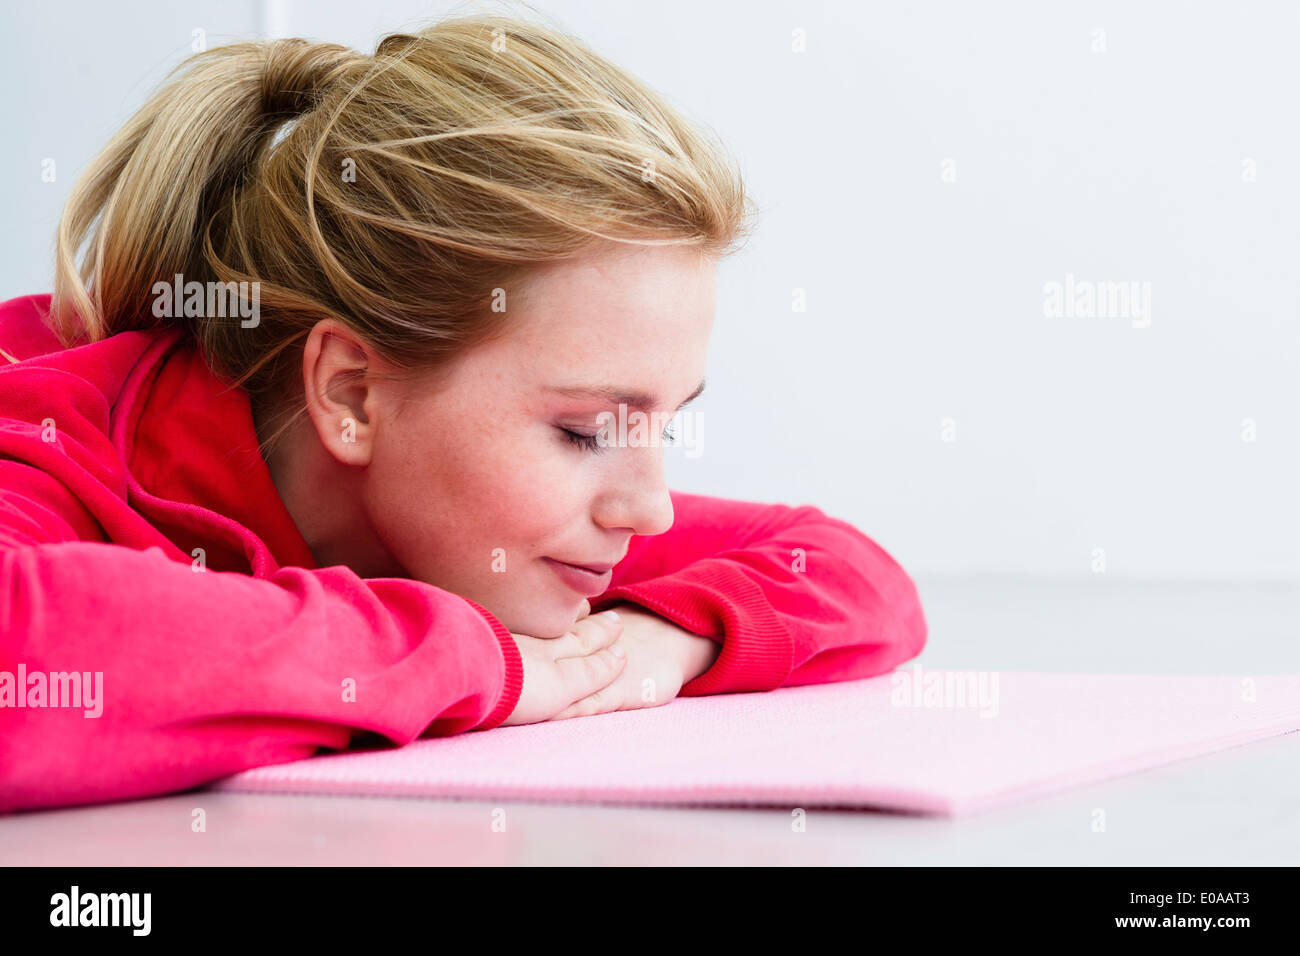 Young woman lying on exercise mat Stock Photo